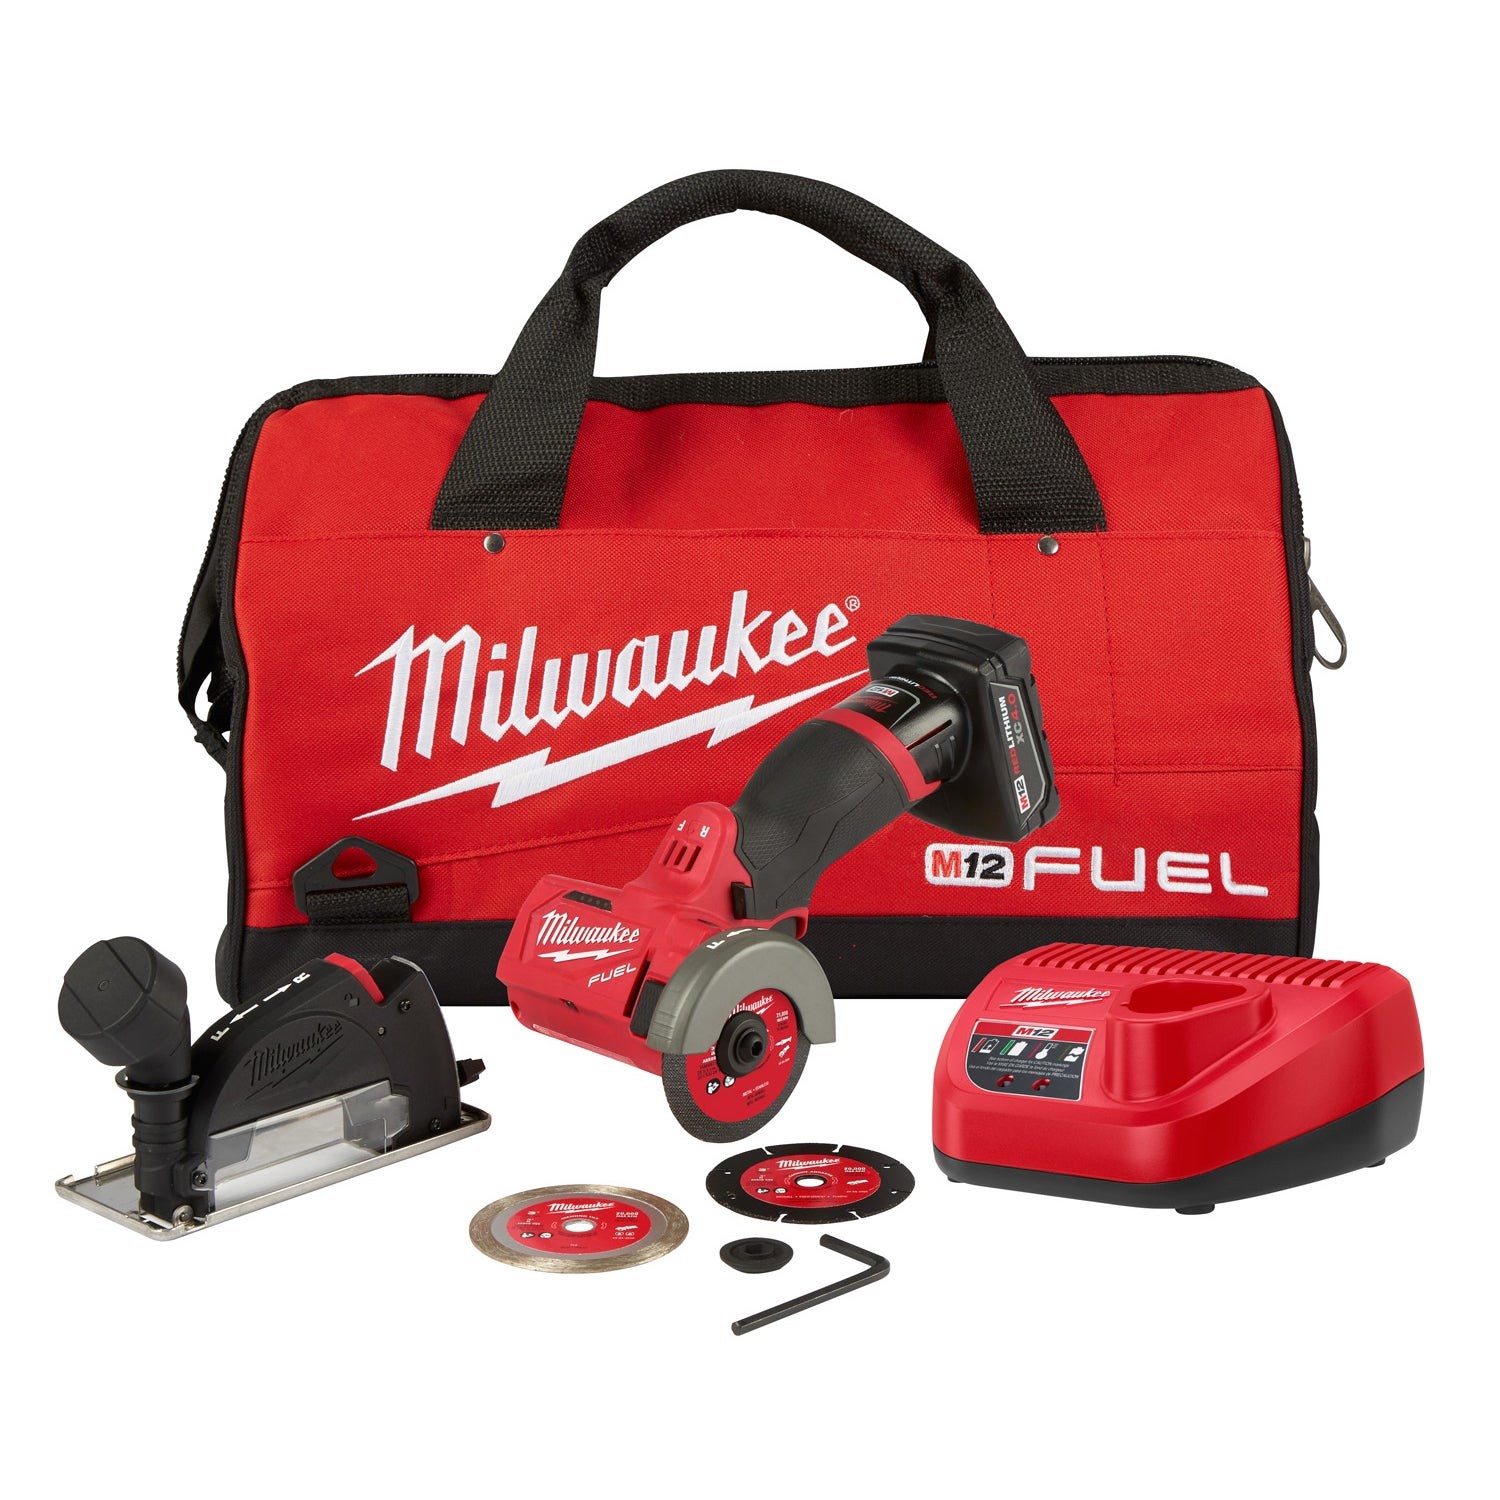 M12 FUEL 3" Compact Cut Off Tool Kit